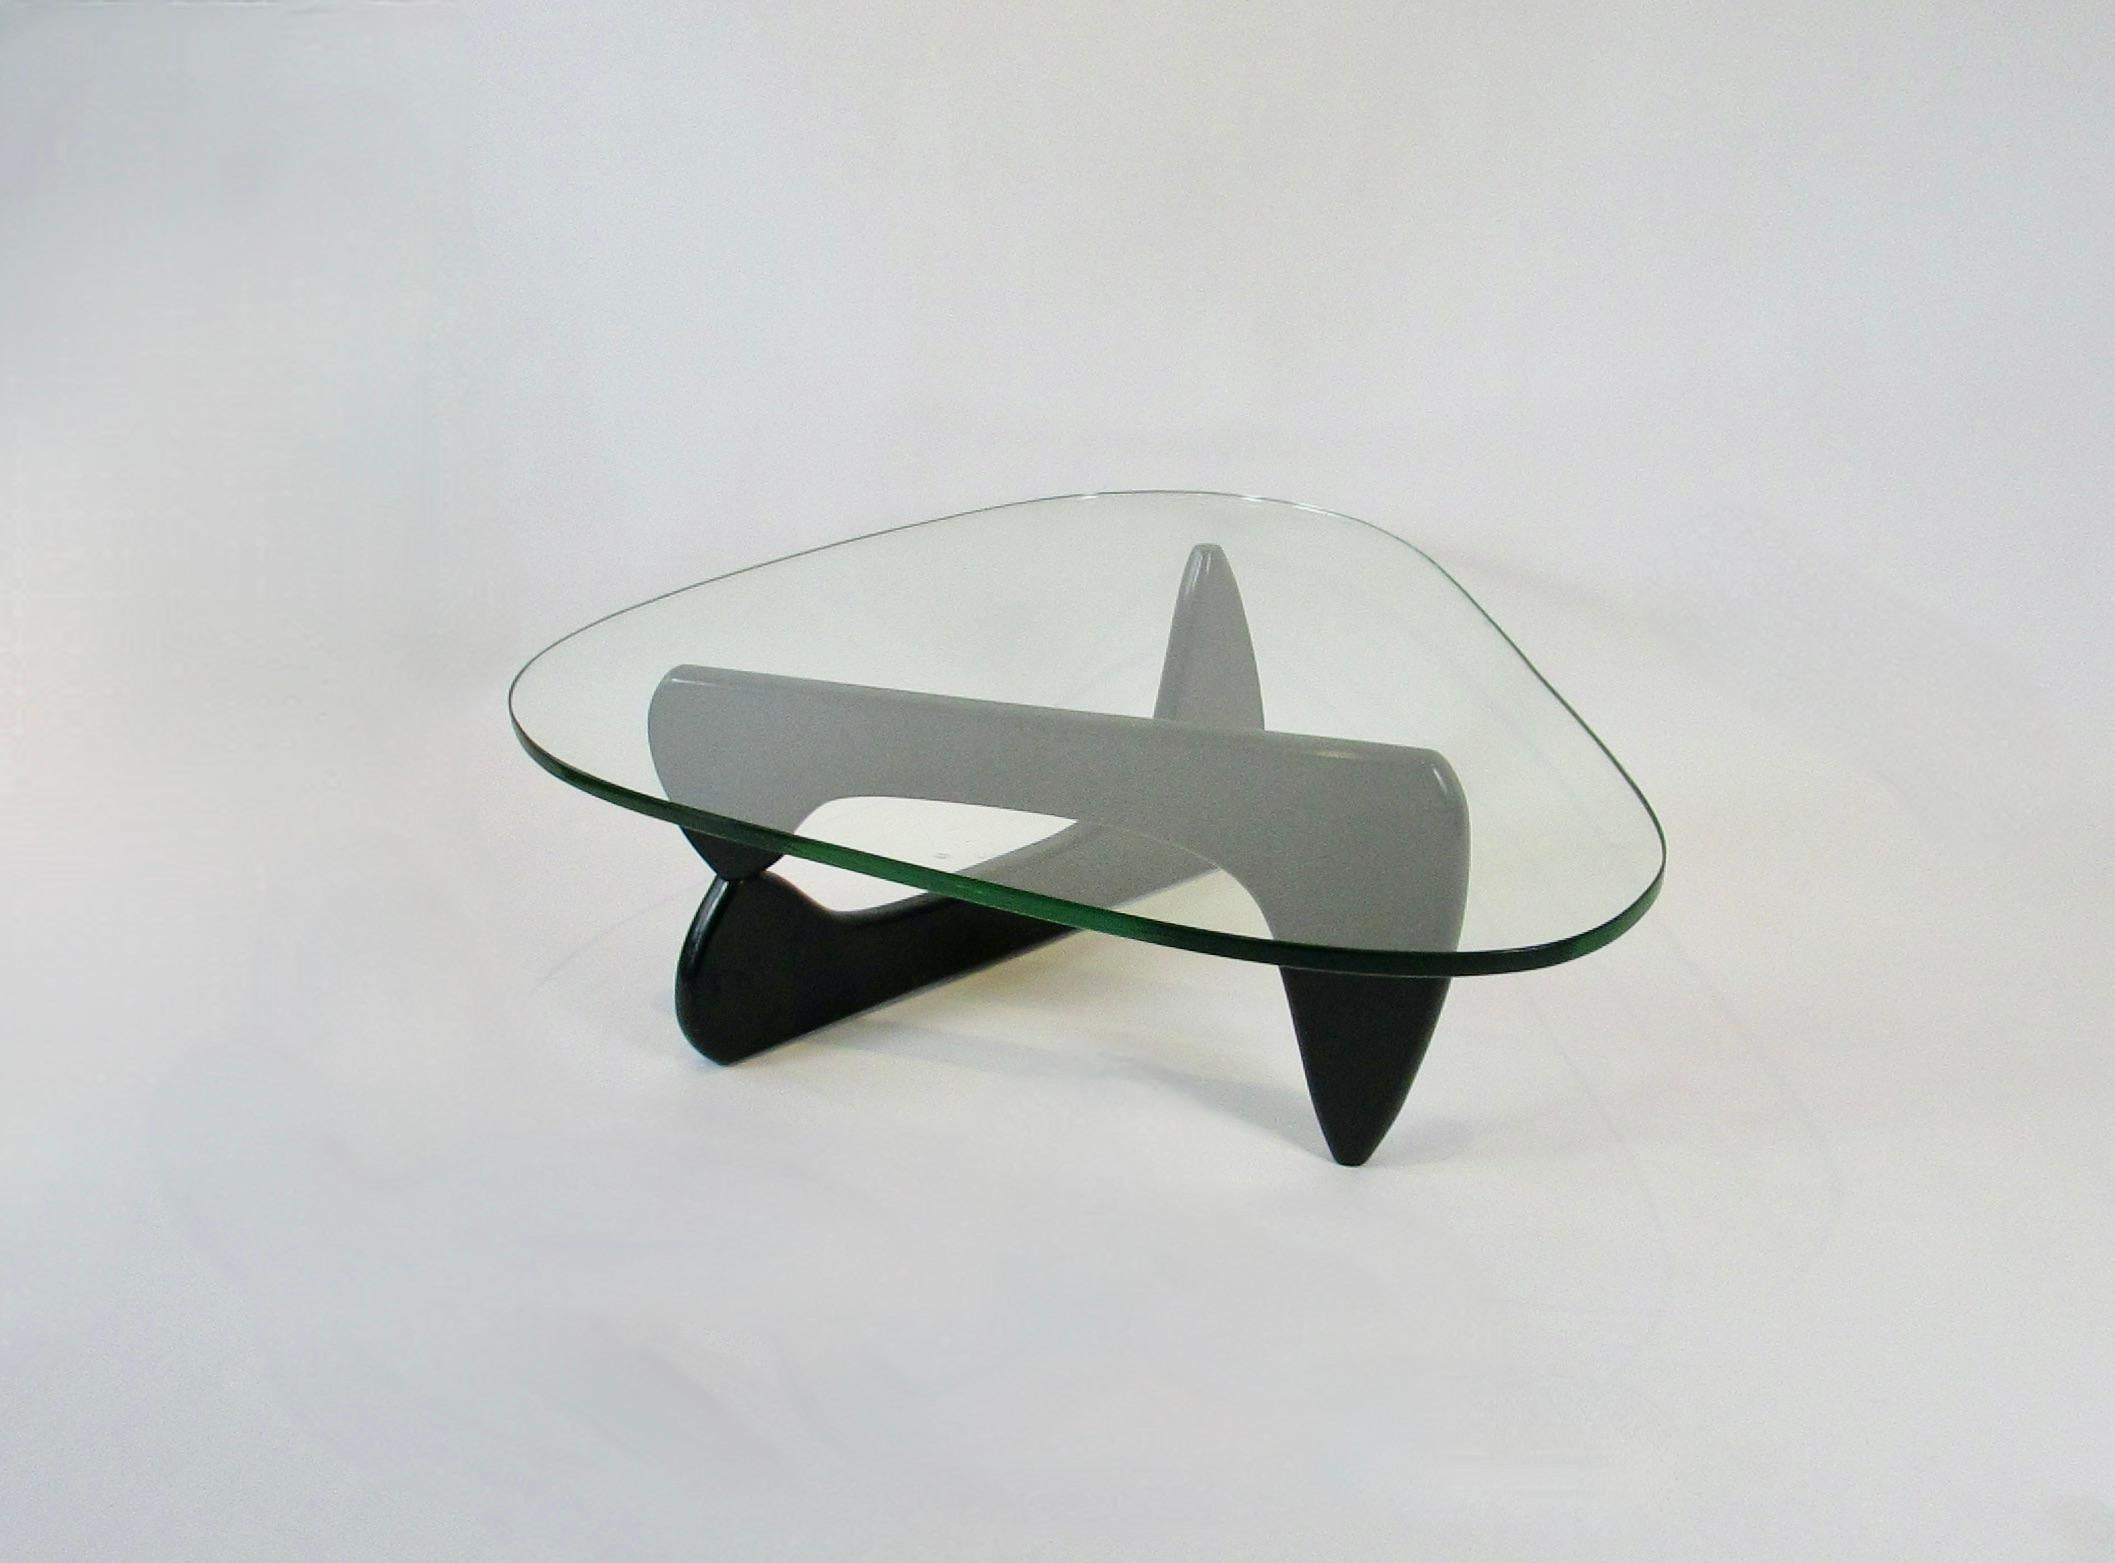 Coffee table designed by the American designer Isamu Noguchi (1904-1988) for Herman Miller. This iconic table has a base of two black lacquered solid wood sculptures hinged on a hidden aluminum pin . 3/4